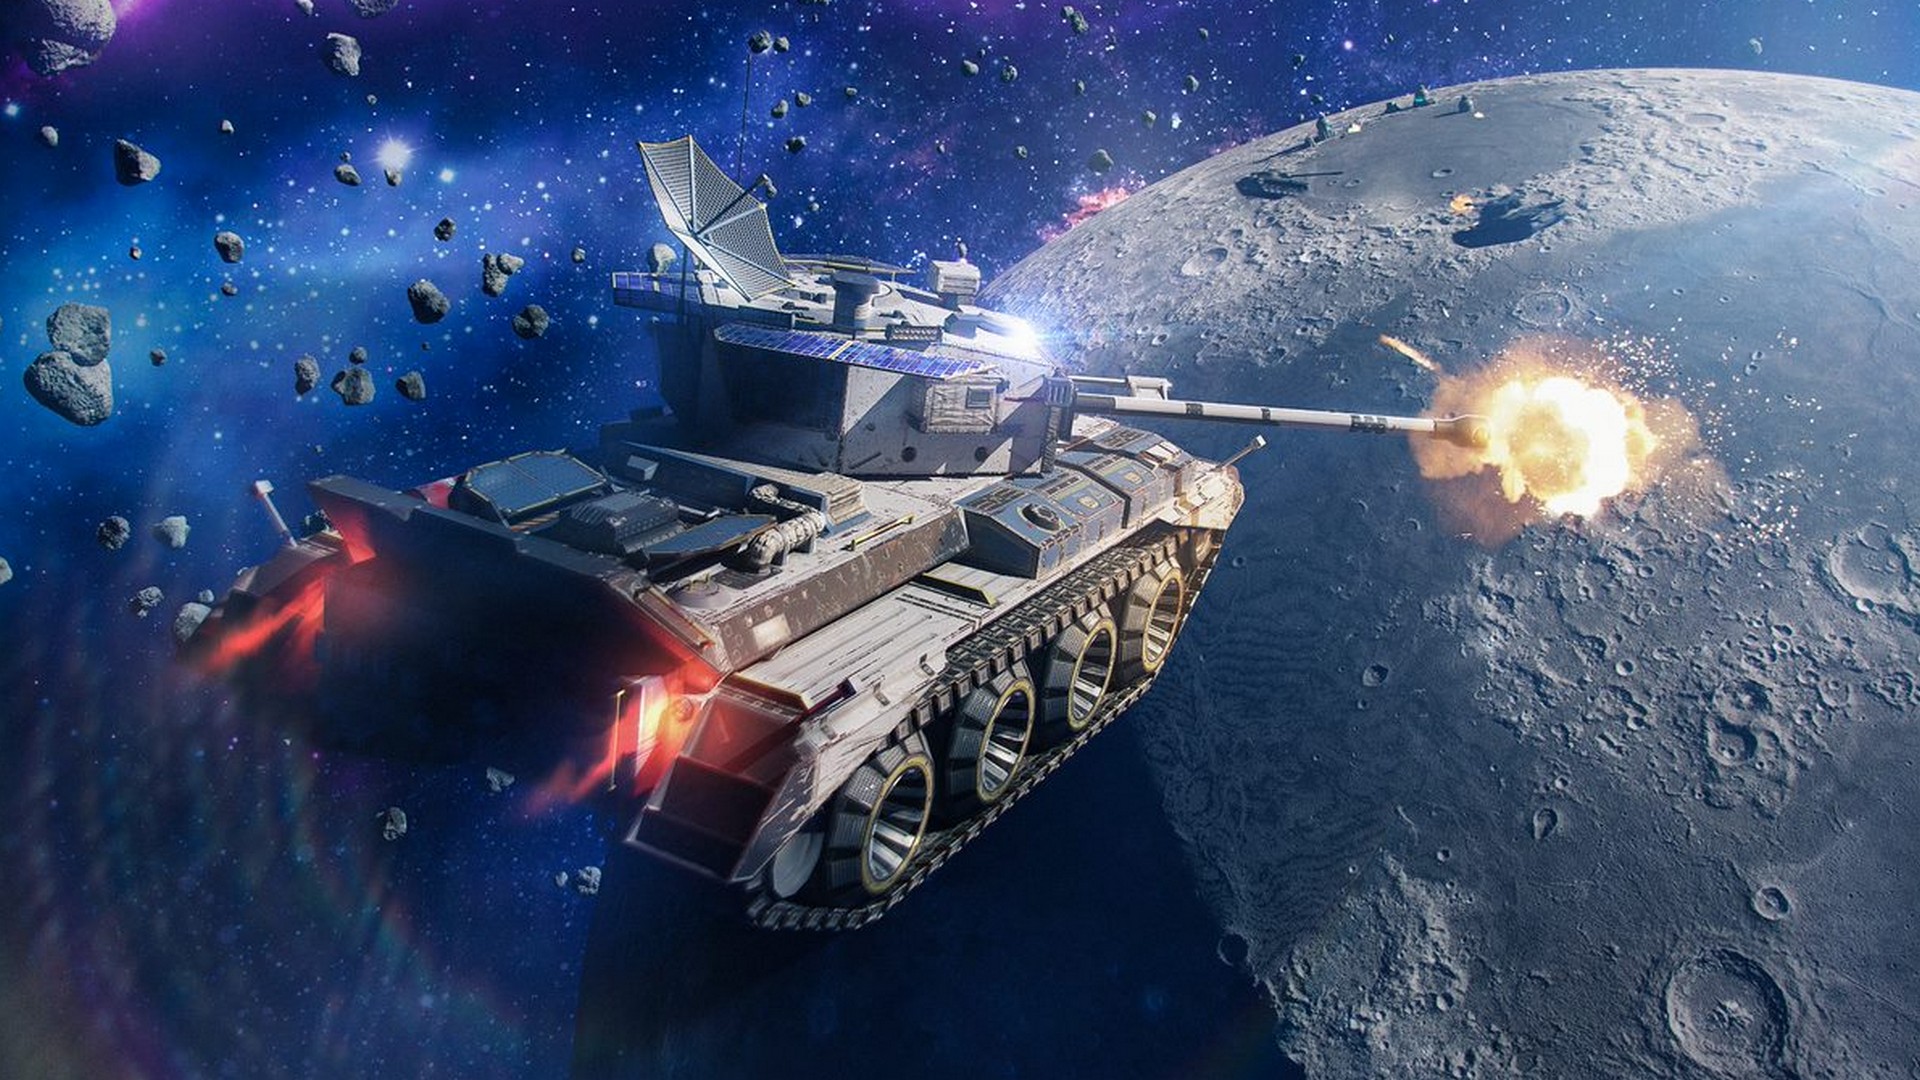 Gravity Force Returns Today To World of Tanks Blitz